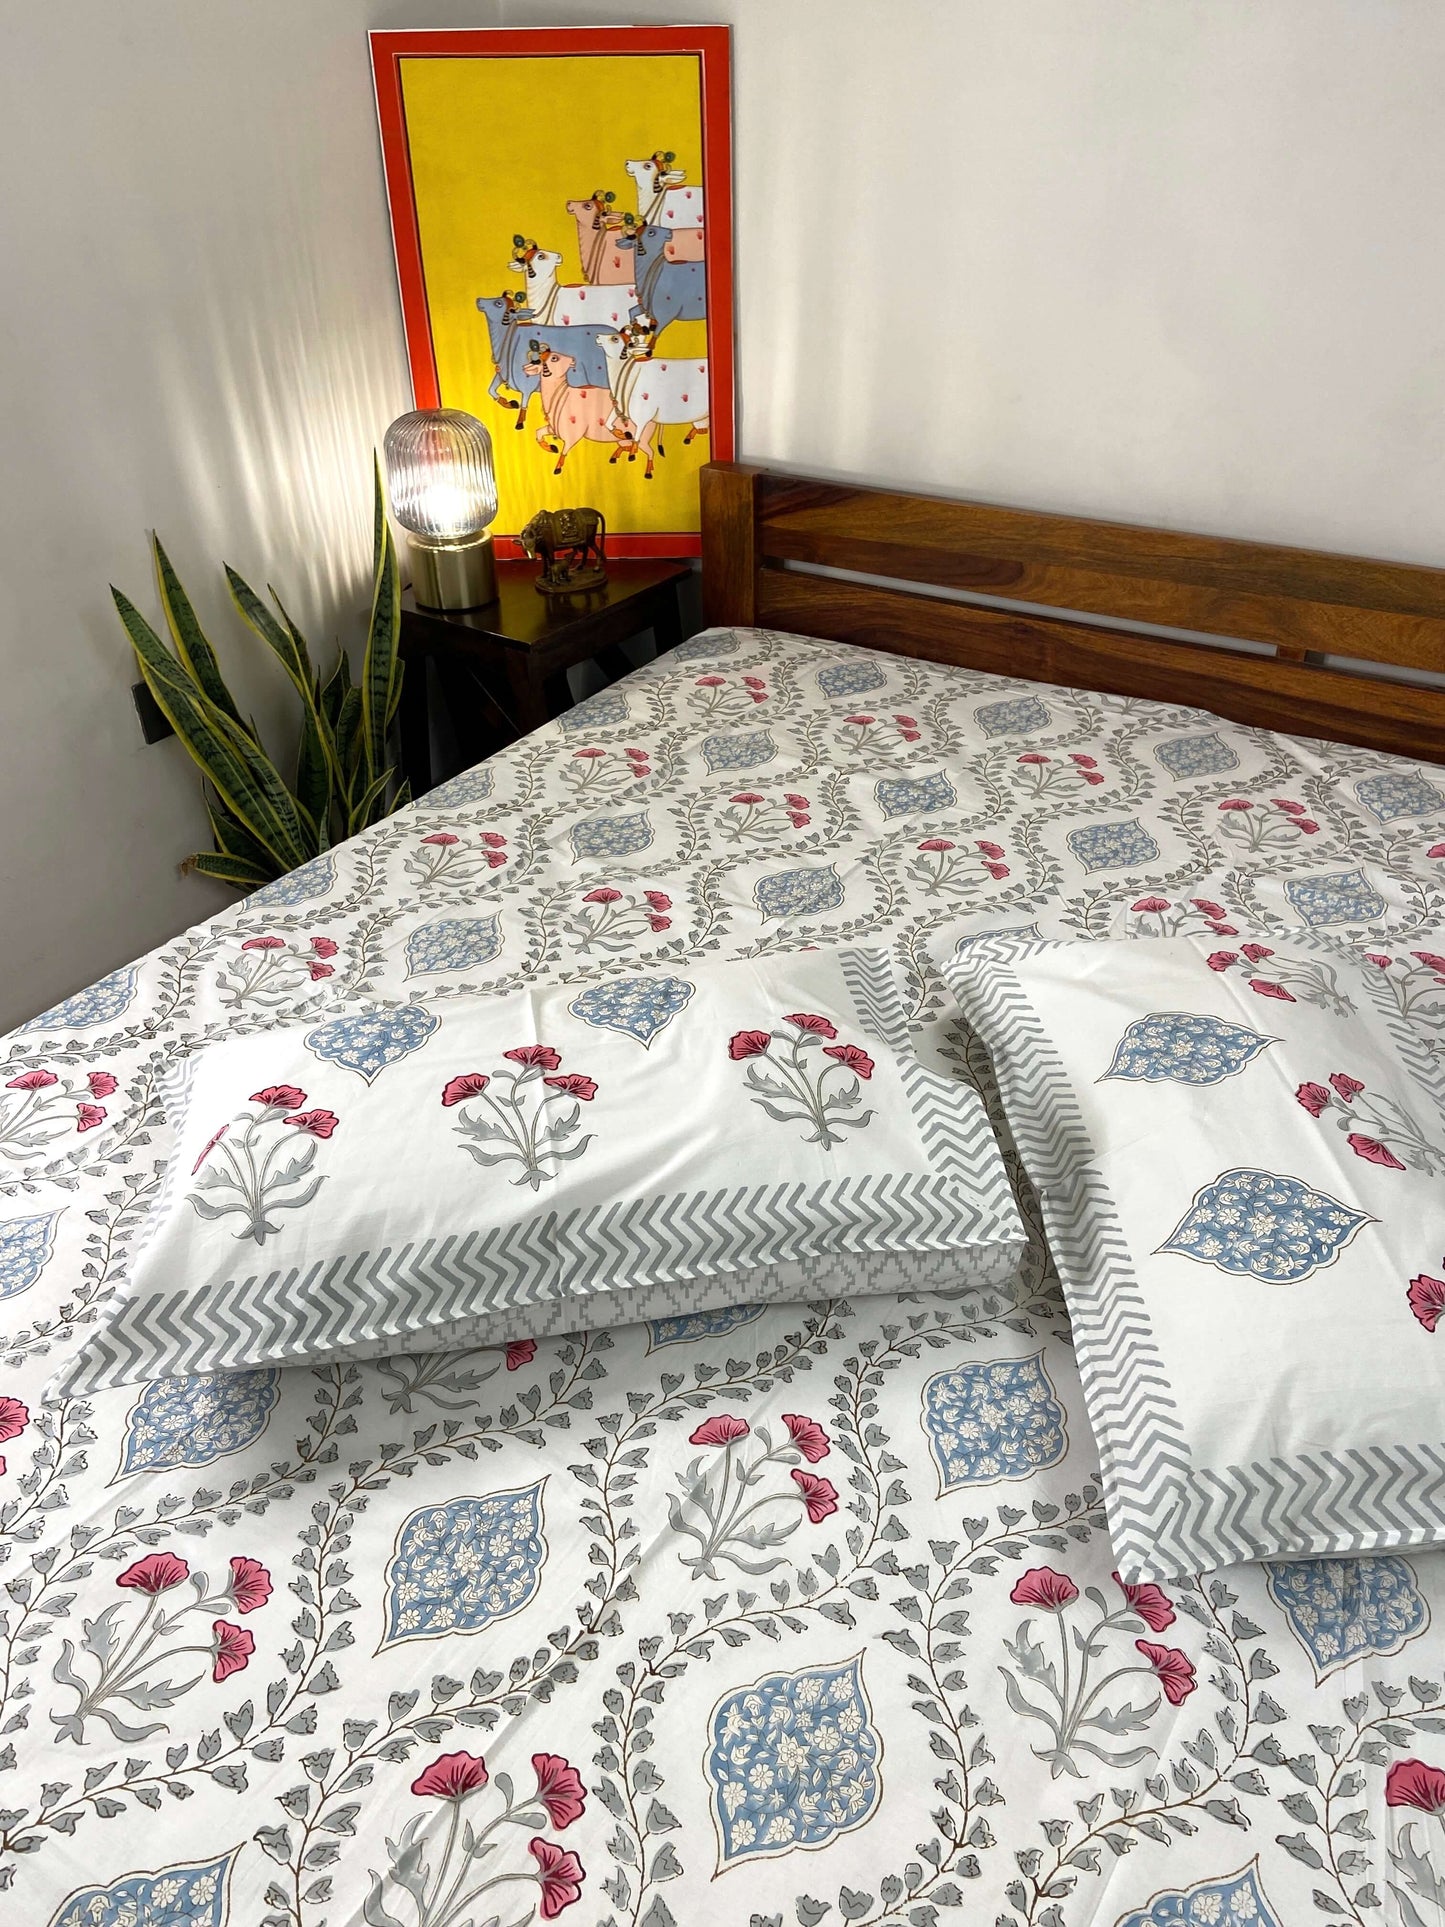 Floral Jaal Percale Hand Block Cotton King Bedsheet